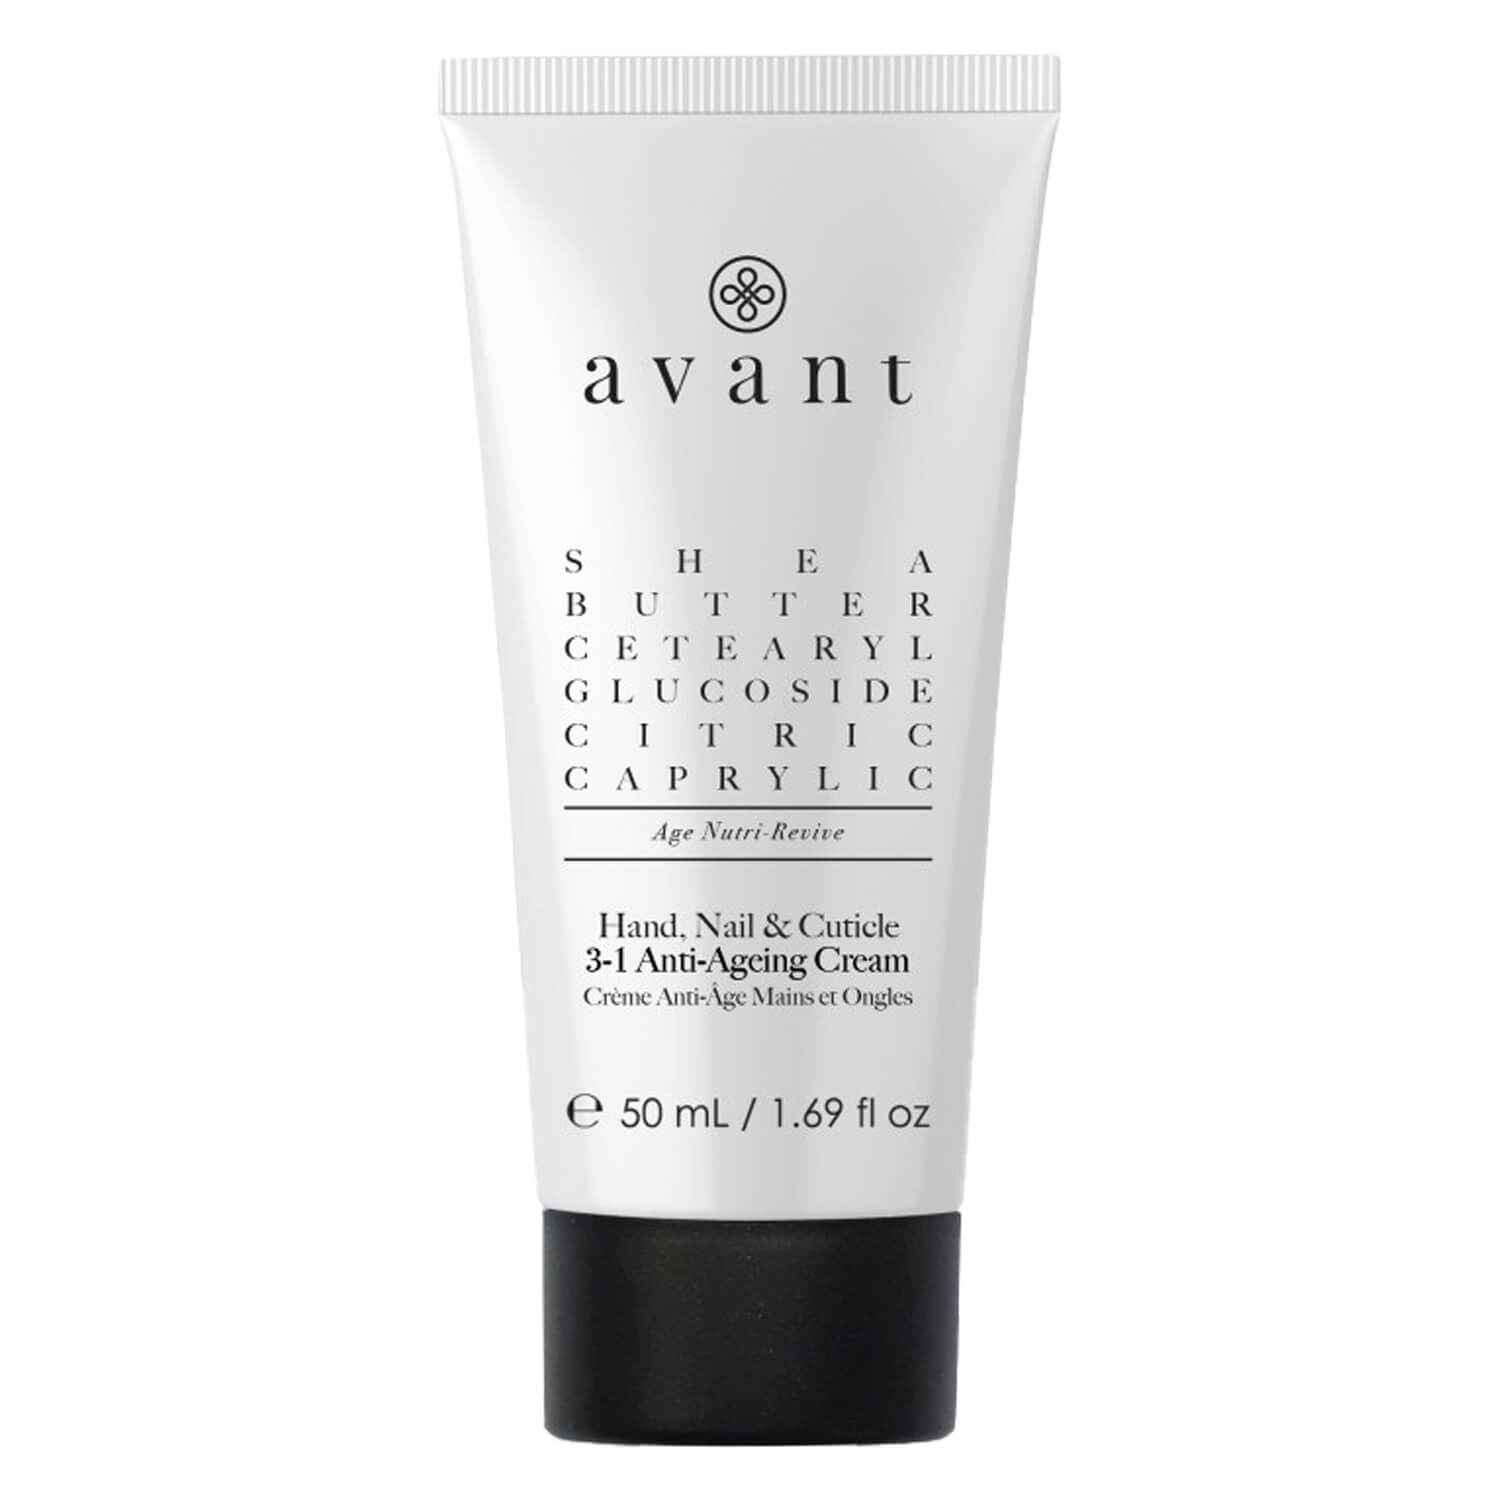 Product image from avant - Anti-Aging Hand Nail & Cuticle Creme